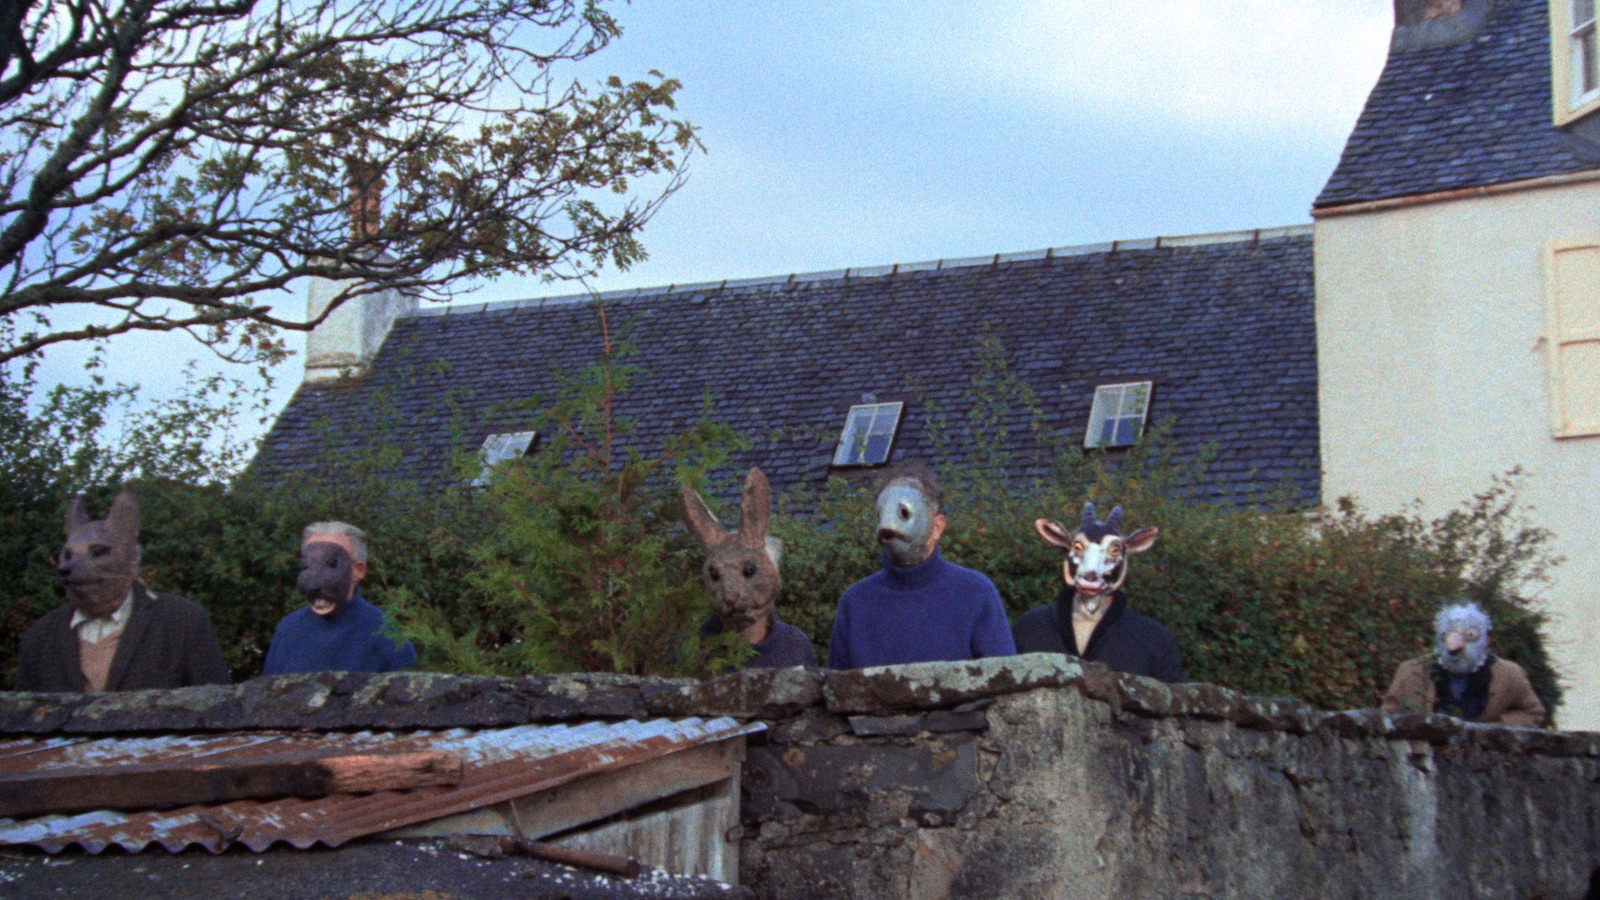 People in animal masks stand behind a long stone wall behind a rural house